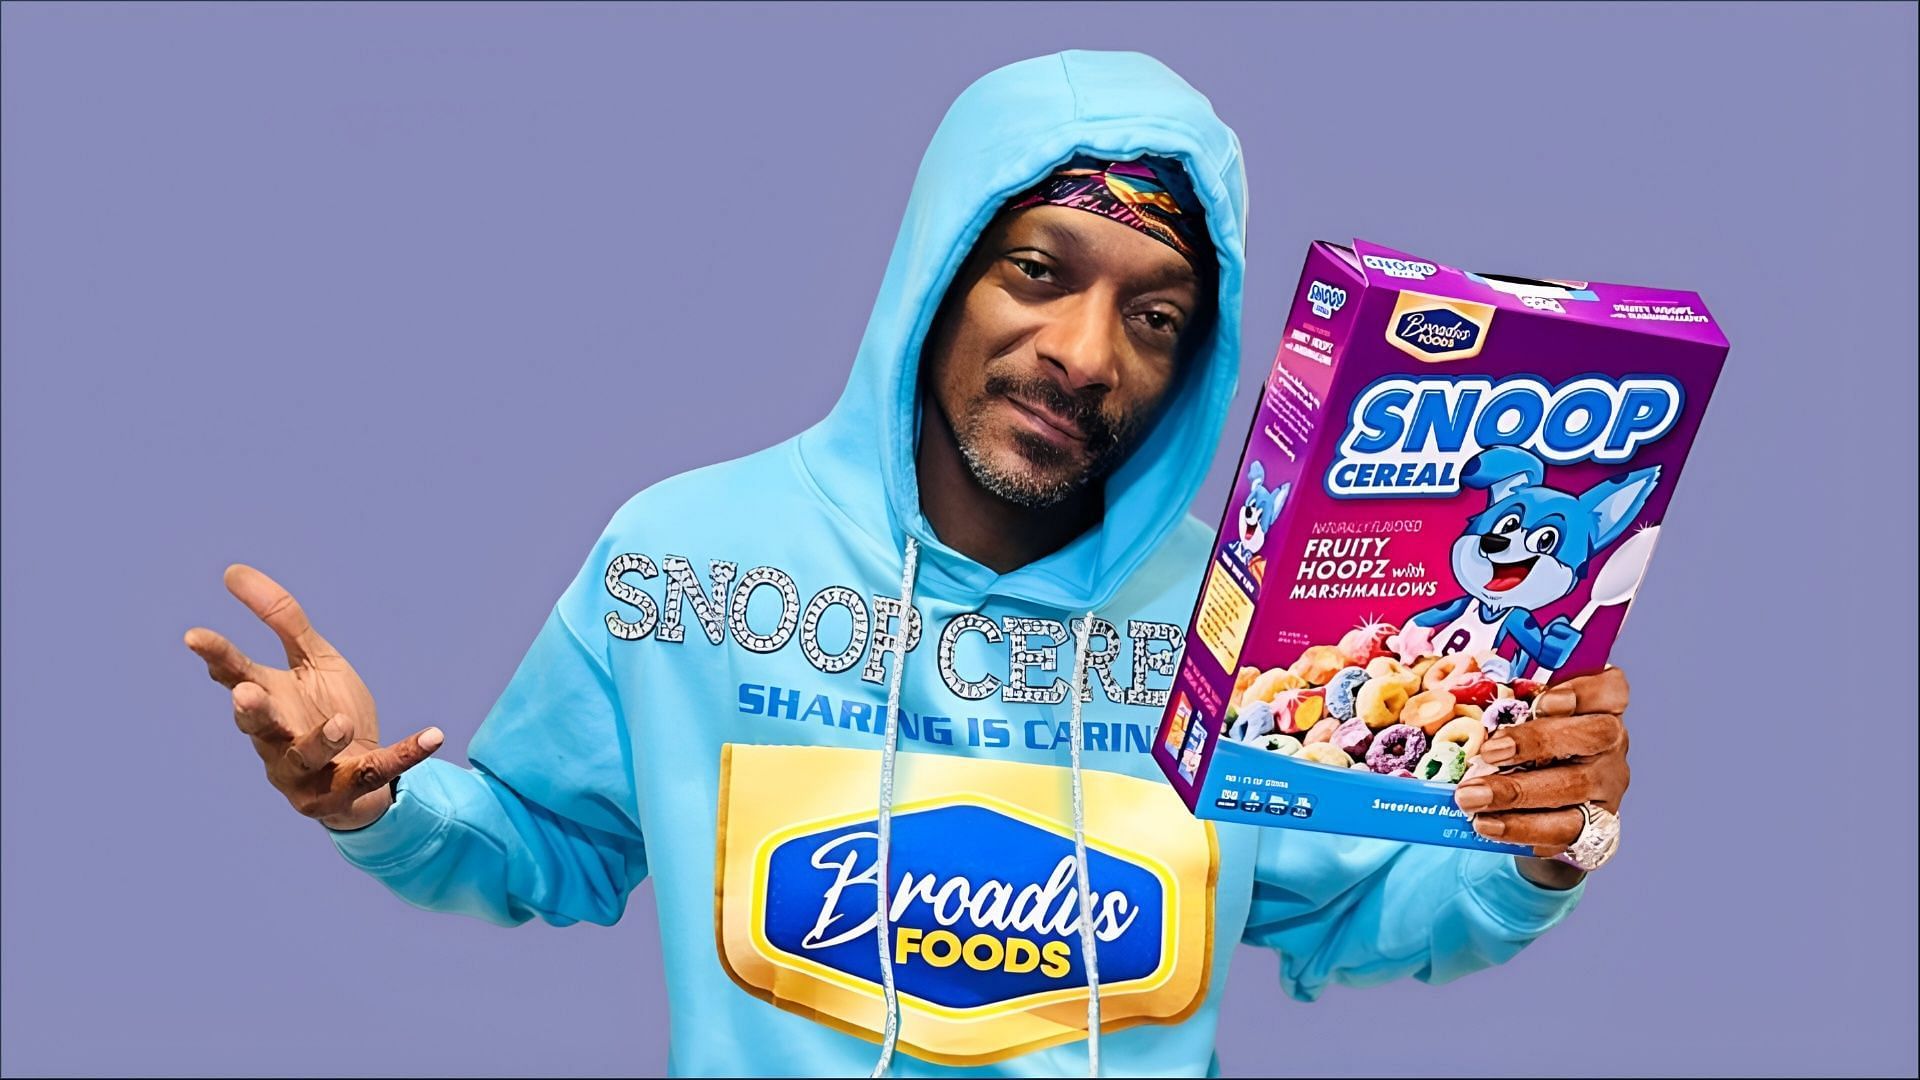 Master P. and Snoop Dog sue Walmart and Post Consumer Brands for attempting to sabotage their cereal brand (Image via Snoop Cereal)